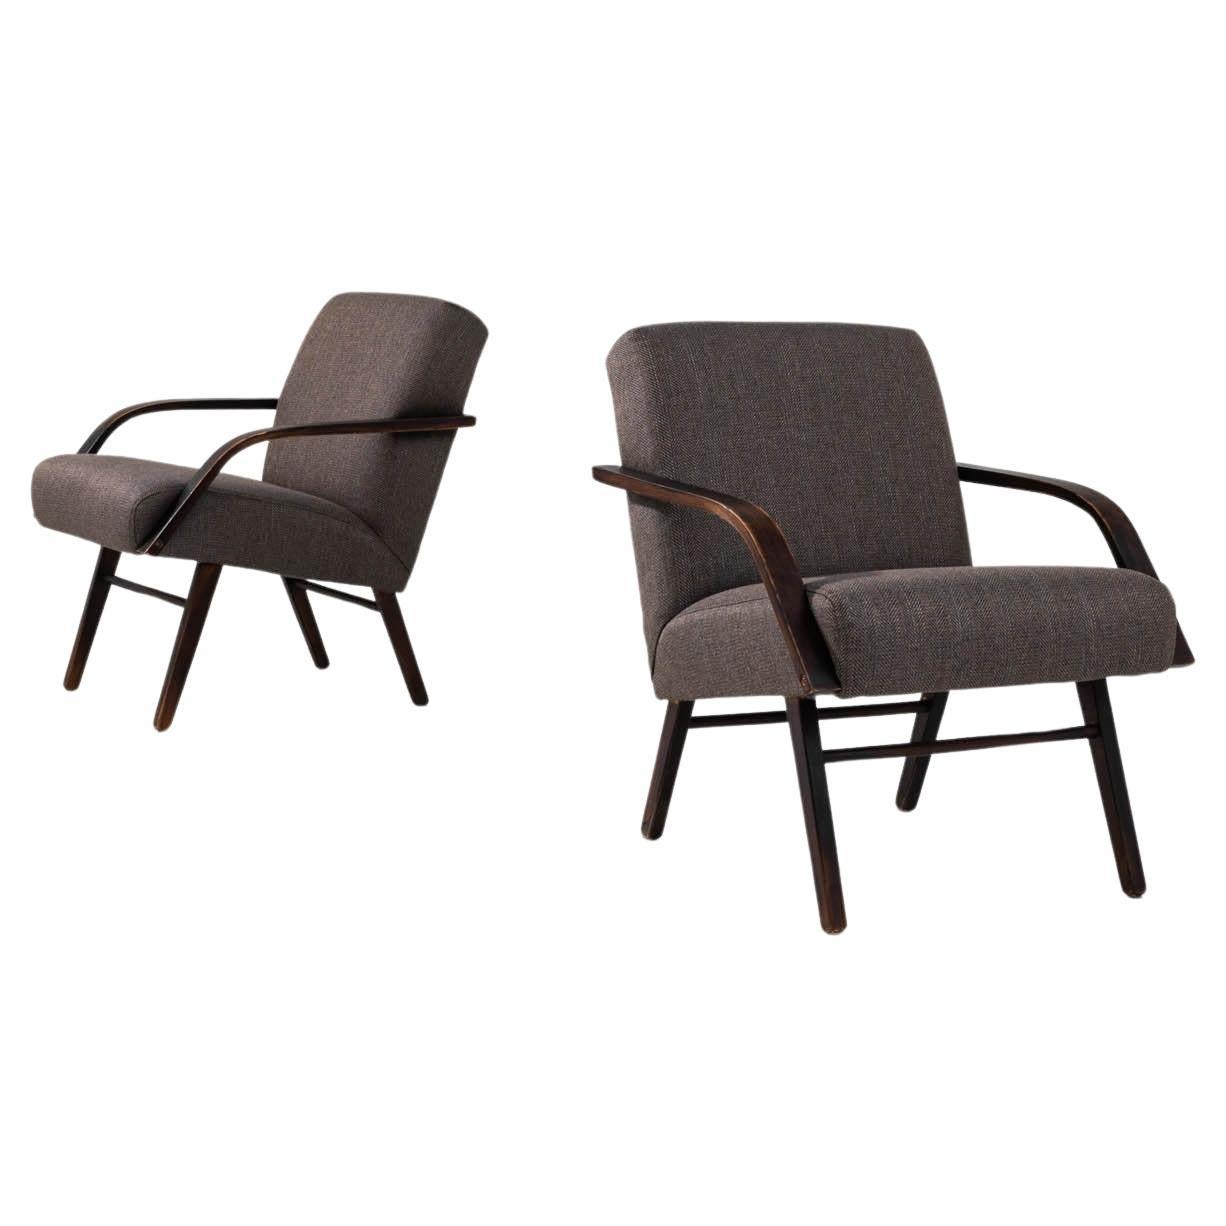 1960s Czech Upholstered Armchairs By TON, a Pair en vente